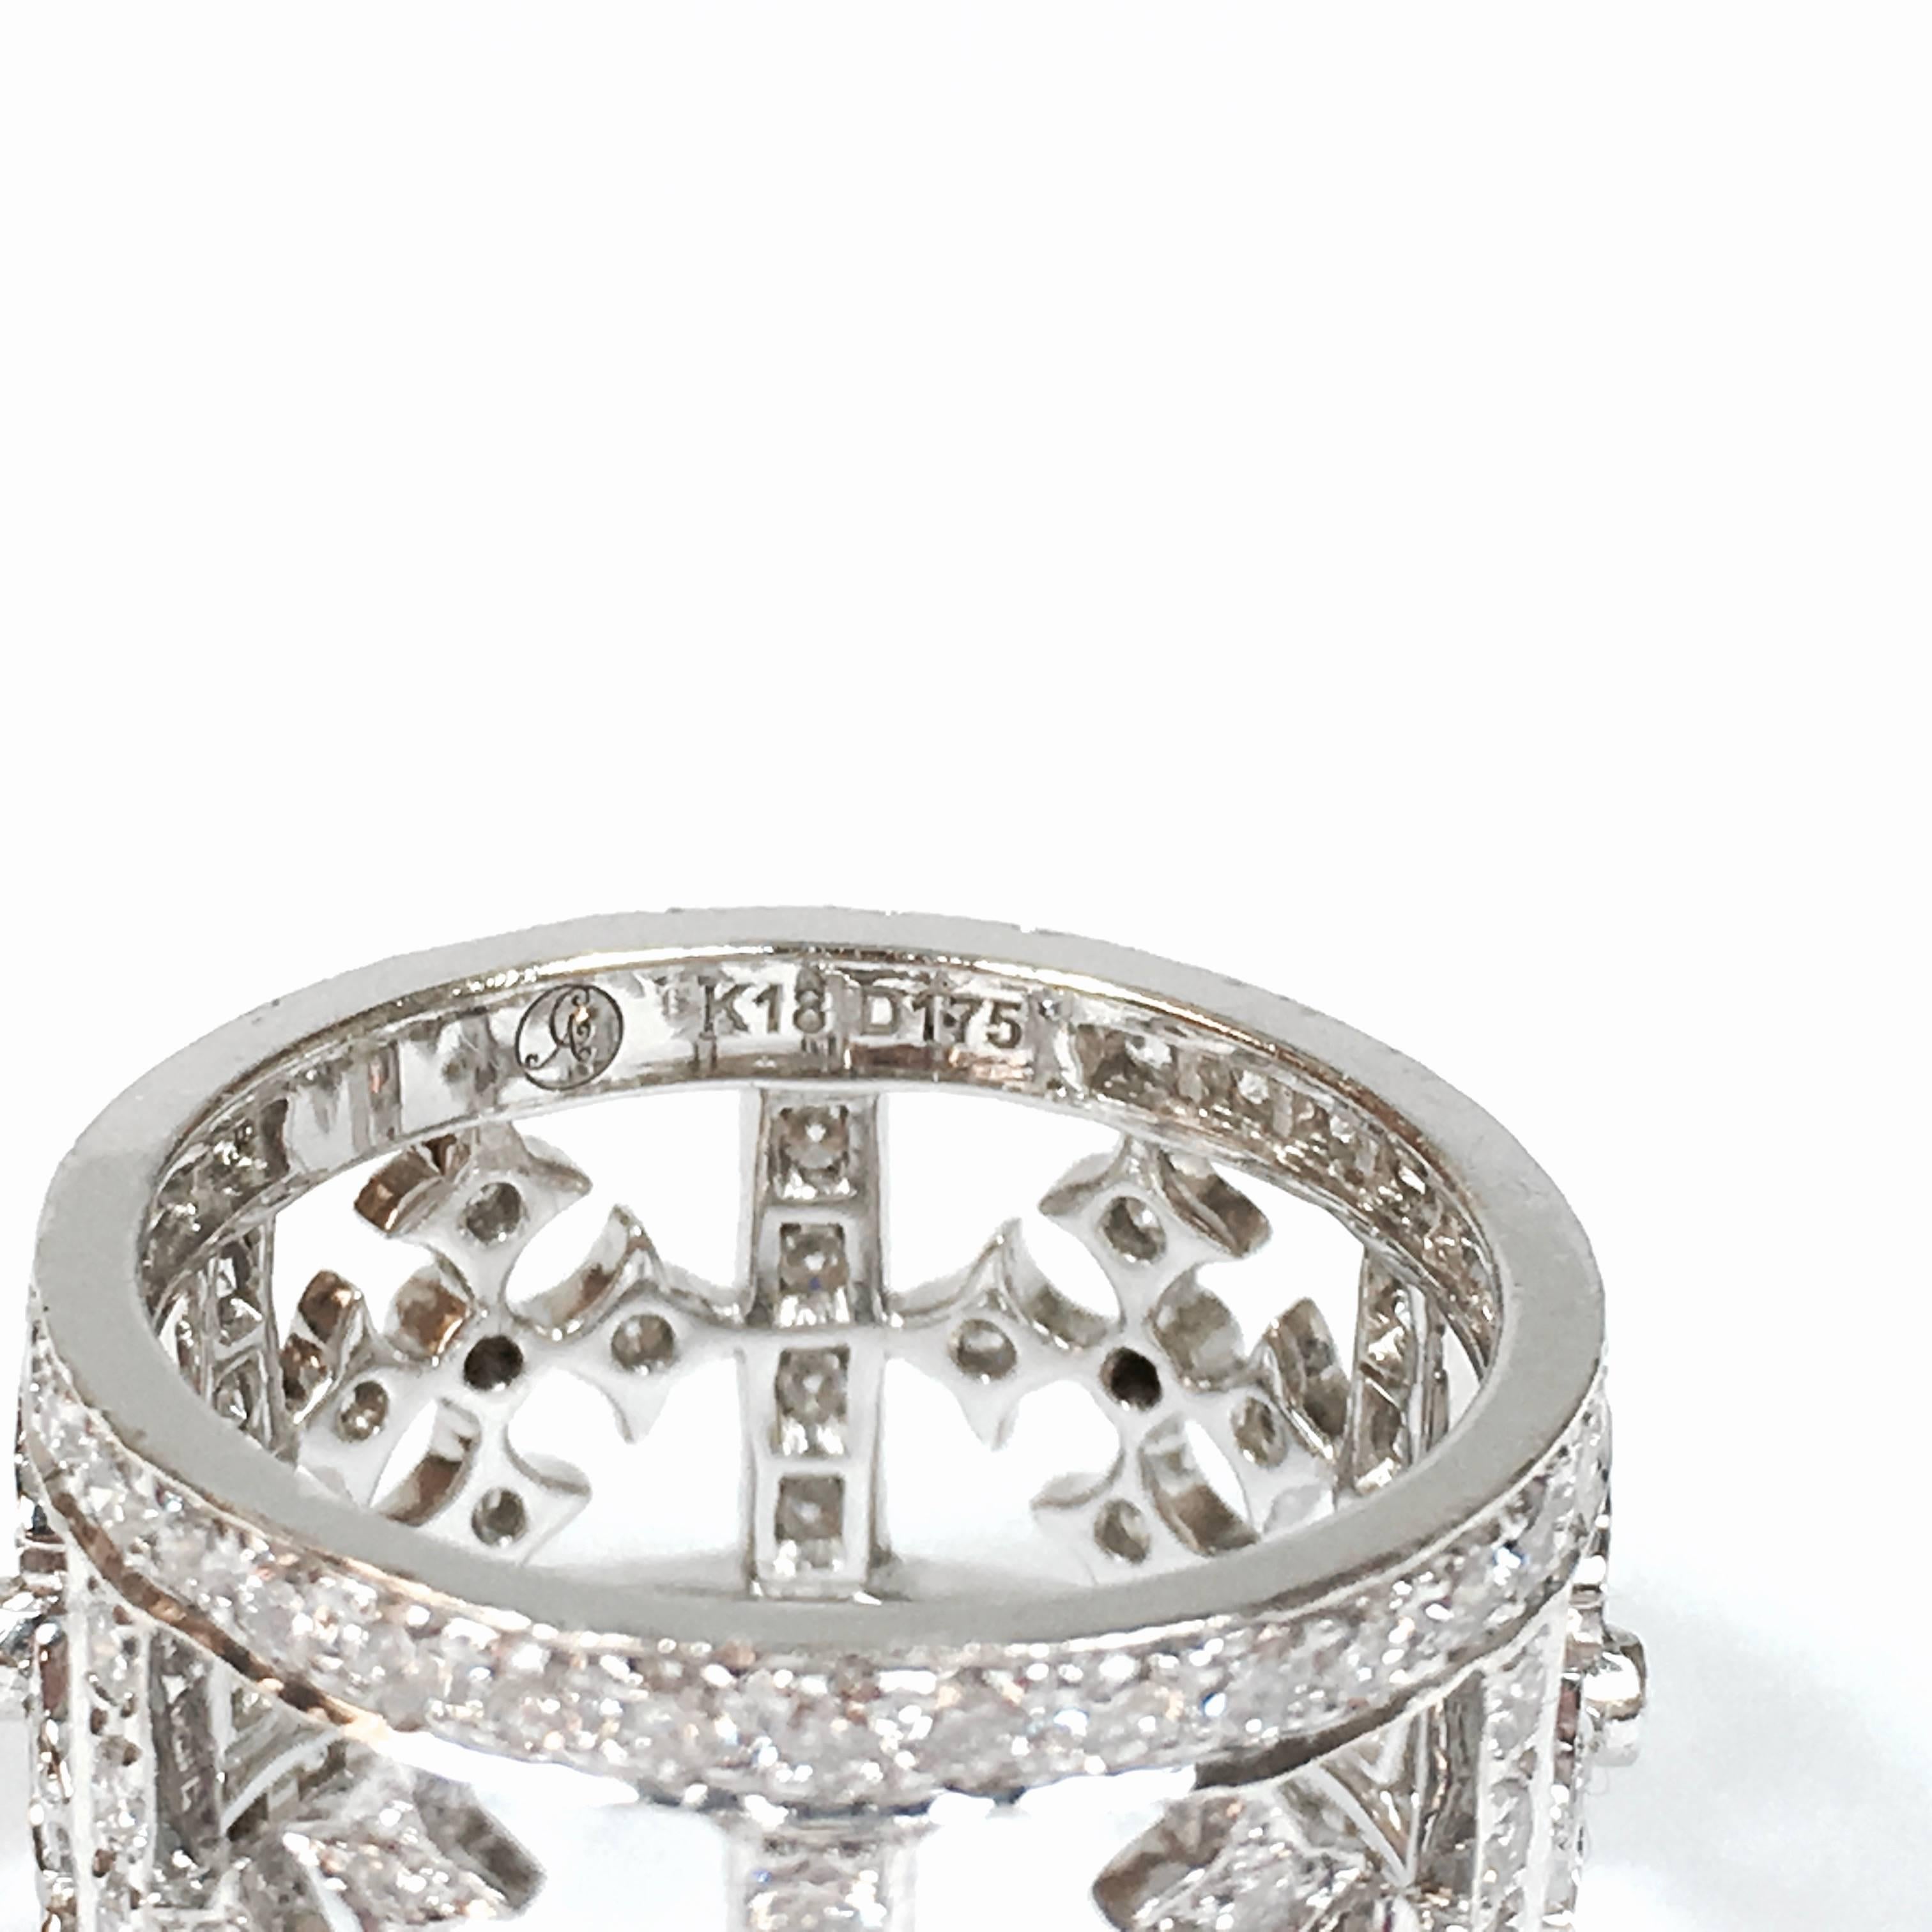 18K white gold eternity ring from designer Lauren K. Featurign a series of cascading diamond set maltese cross sections framed by diamonds.
Total diamond weight: 1.75 ct, Color: F-G, Clarity: VS1-VS2
Size: 5 3/4 (do not recommend sizing)
Width: